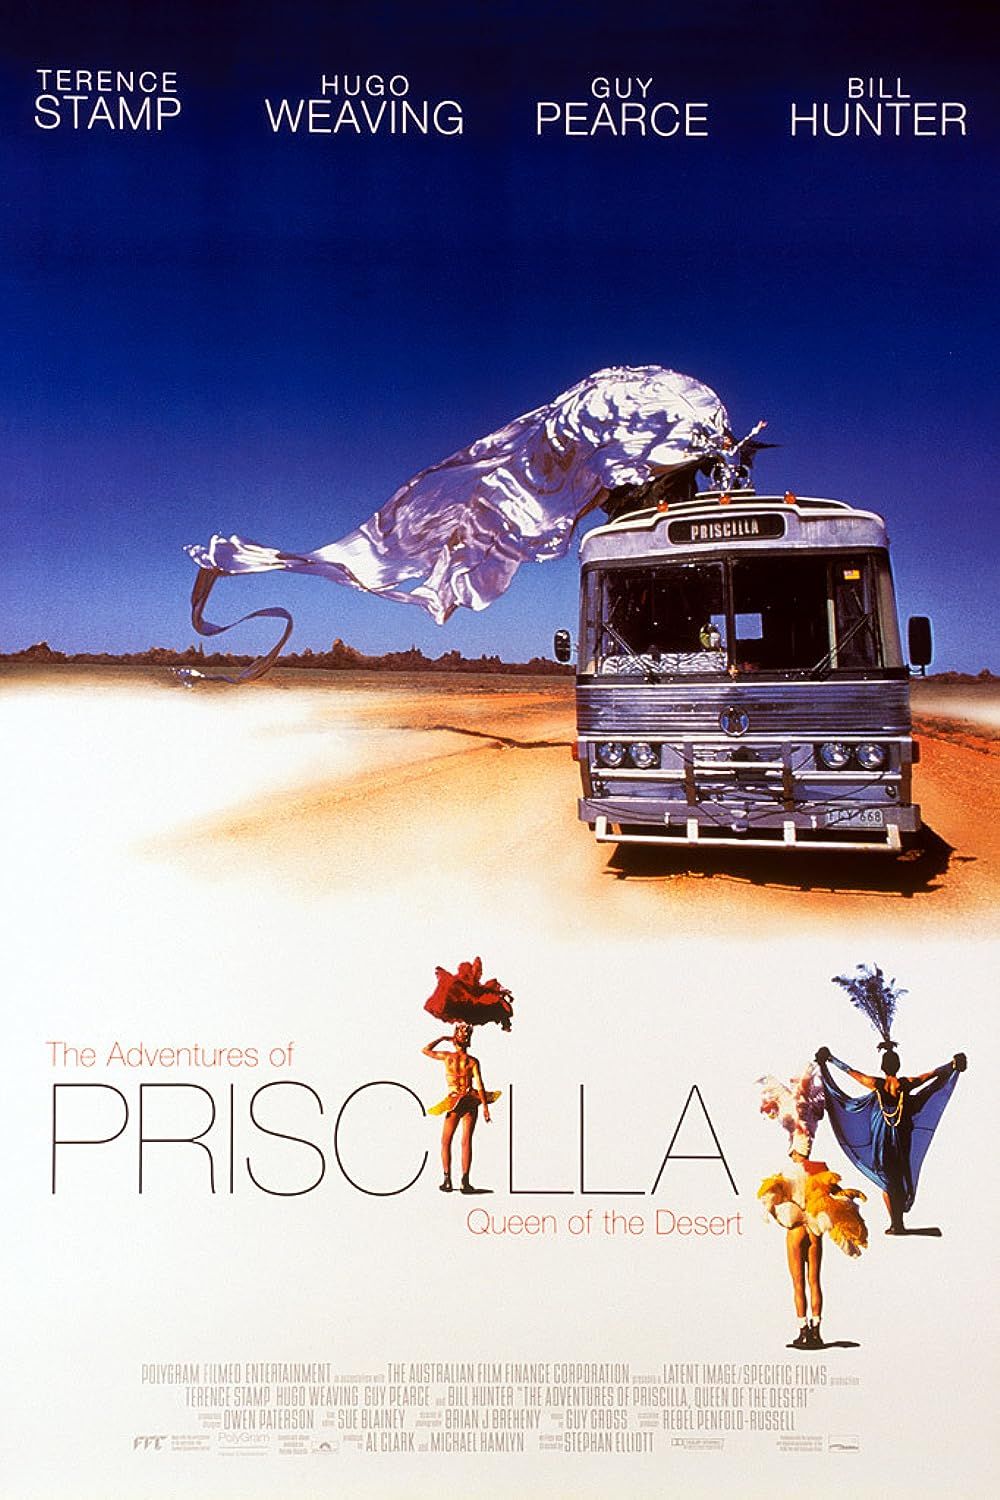 The main cast and their bus from the Adventure of Priscilla, Queen of the Desert